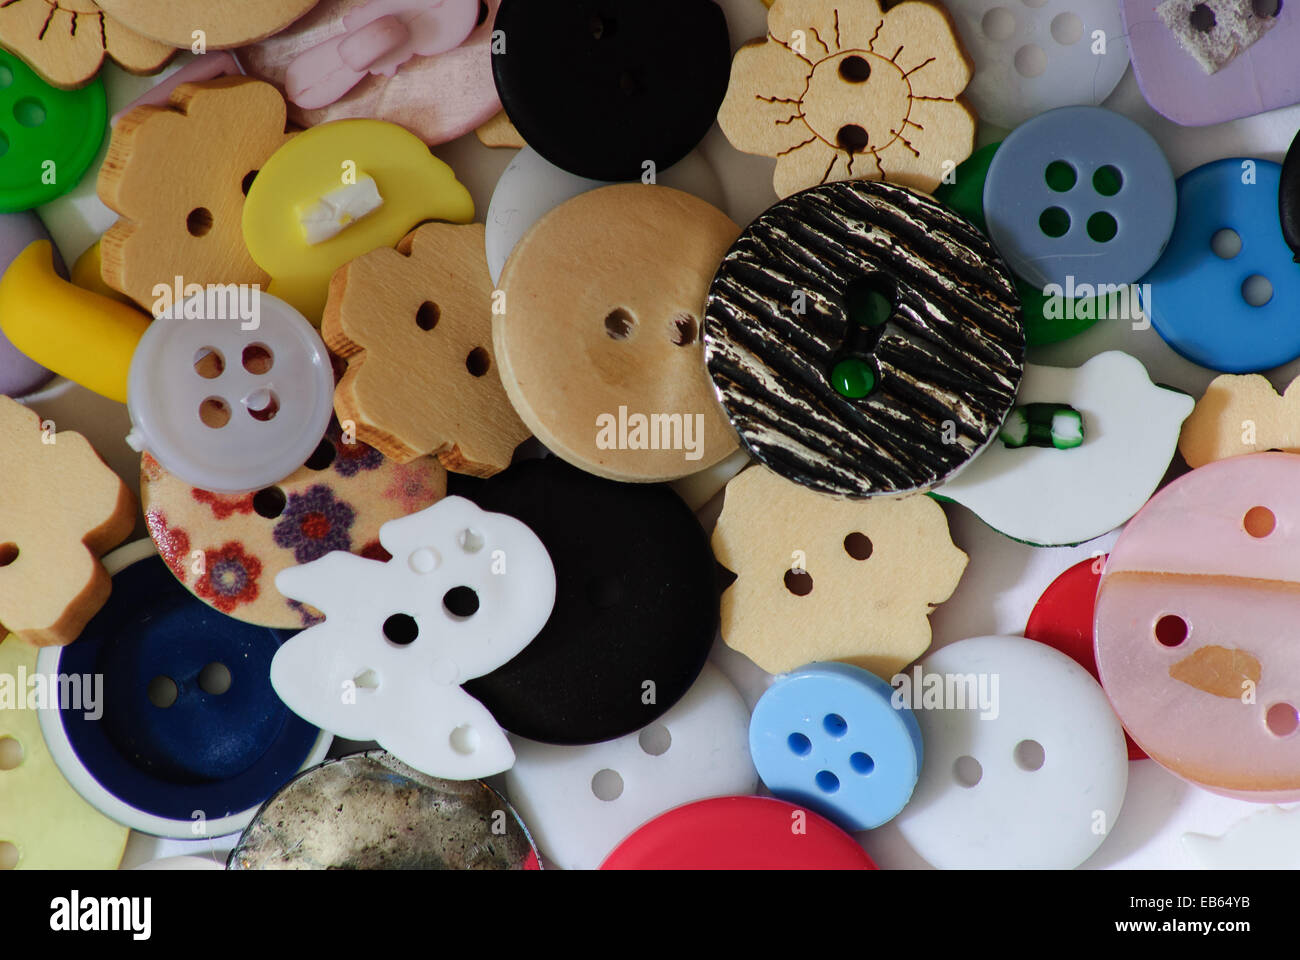 Buttons Embellishments used in crafting Stock Photo